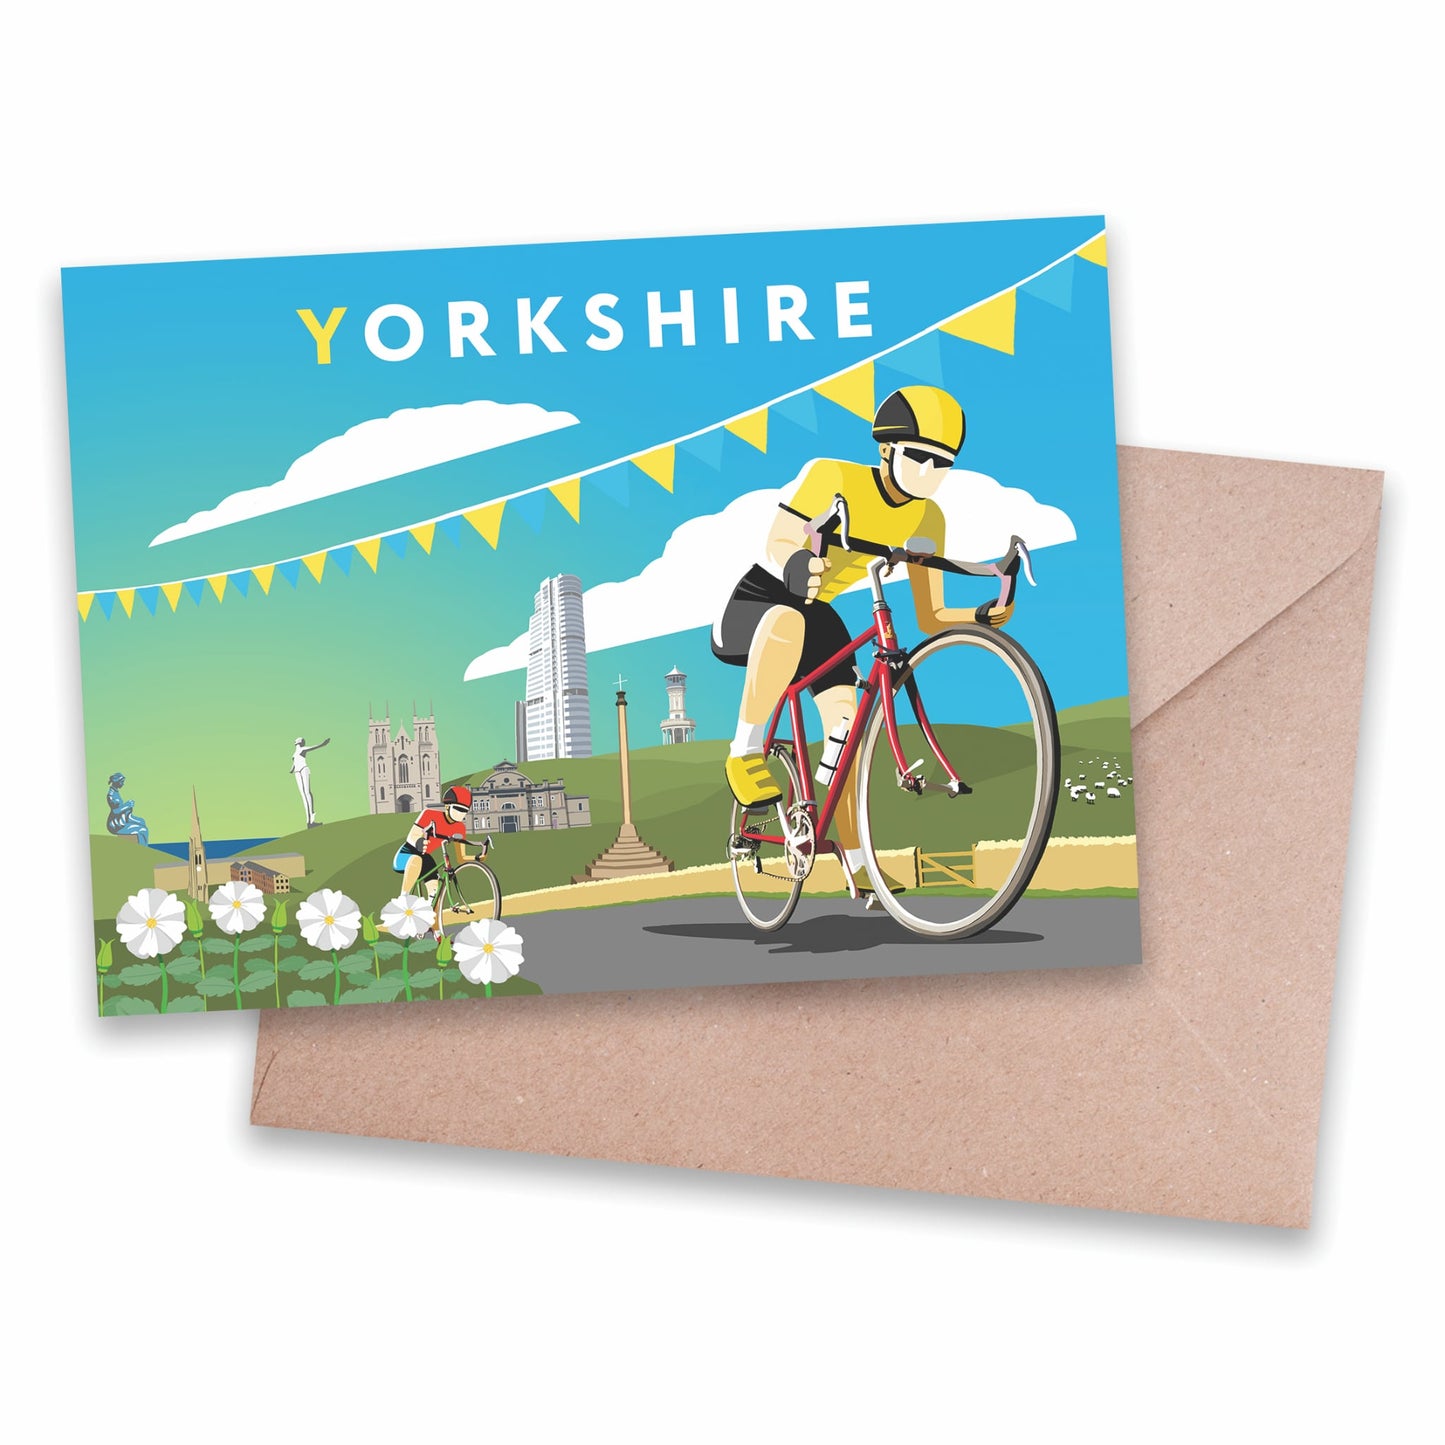 Tour de Yorkshire Greeting Card - The Great Yorkshire Shop